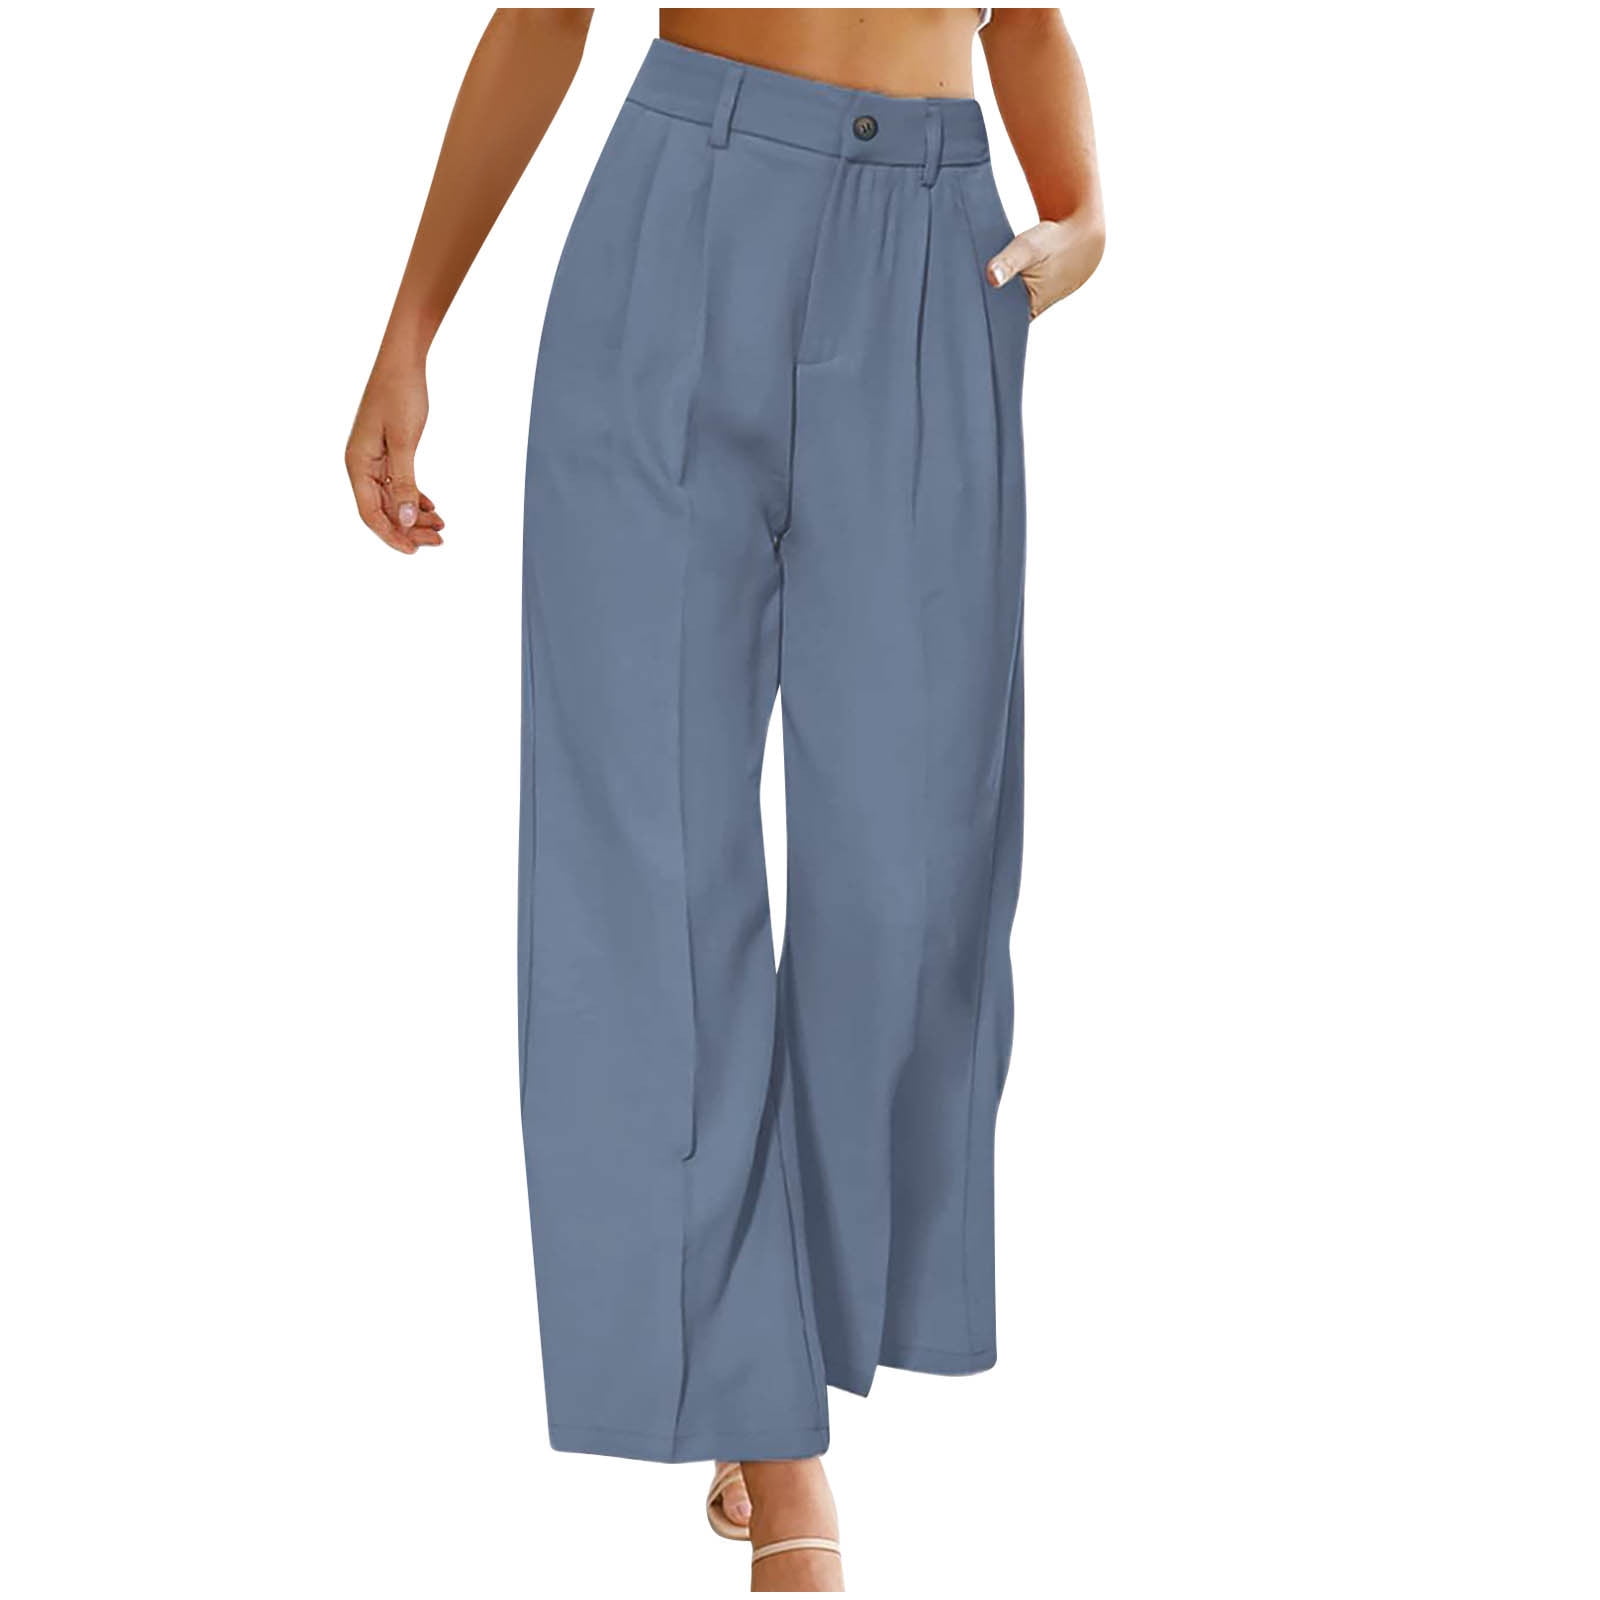 Dress Pants for Women High Waisted Zipper Wide Leg Pants Casual Loose Comfy  Work Office Lounge Trousers with Pockets 